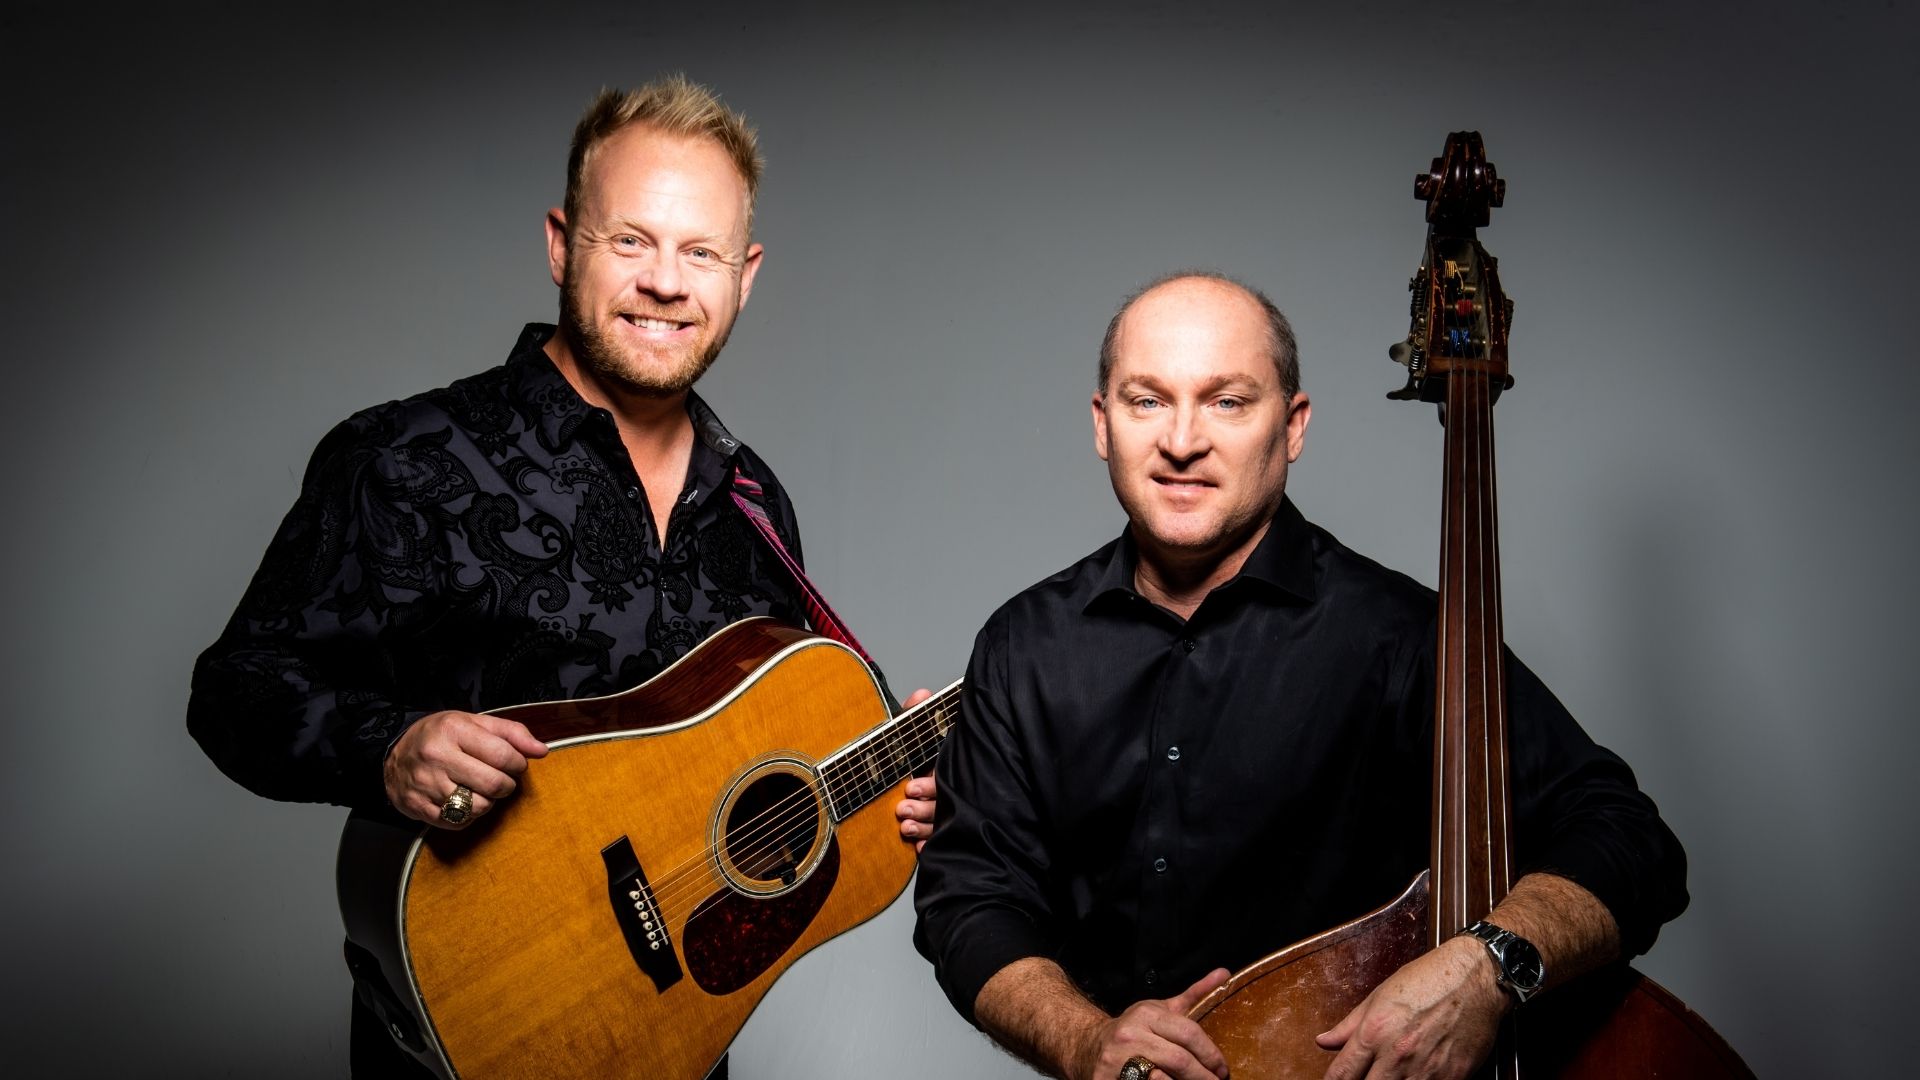 An Evening with Dailey & Vincent